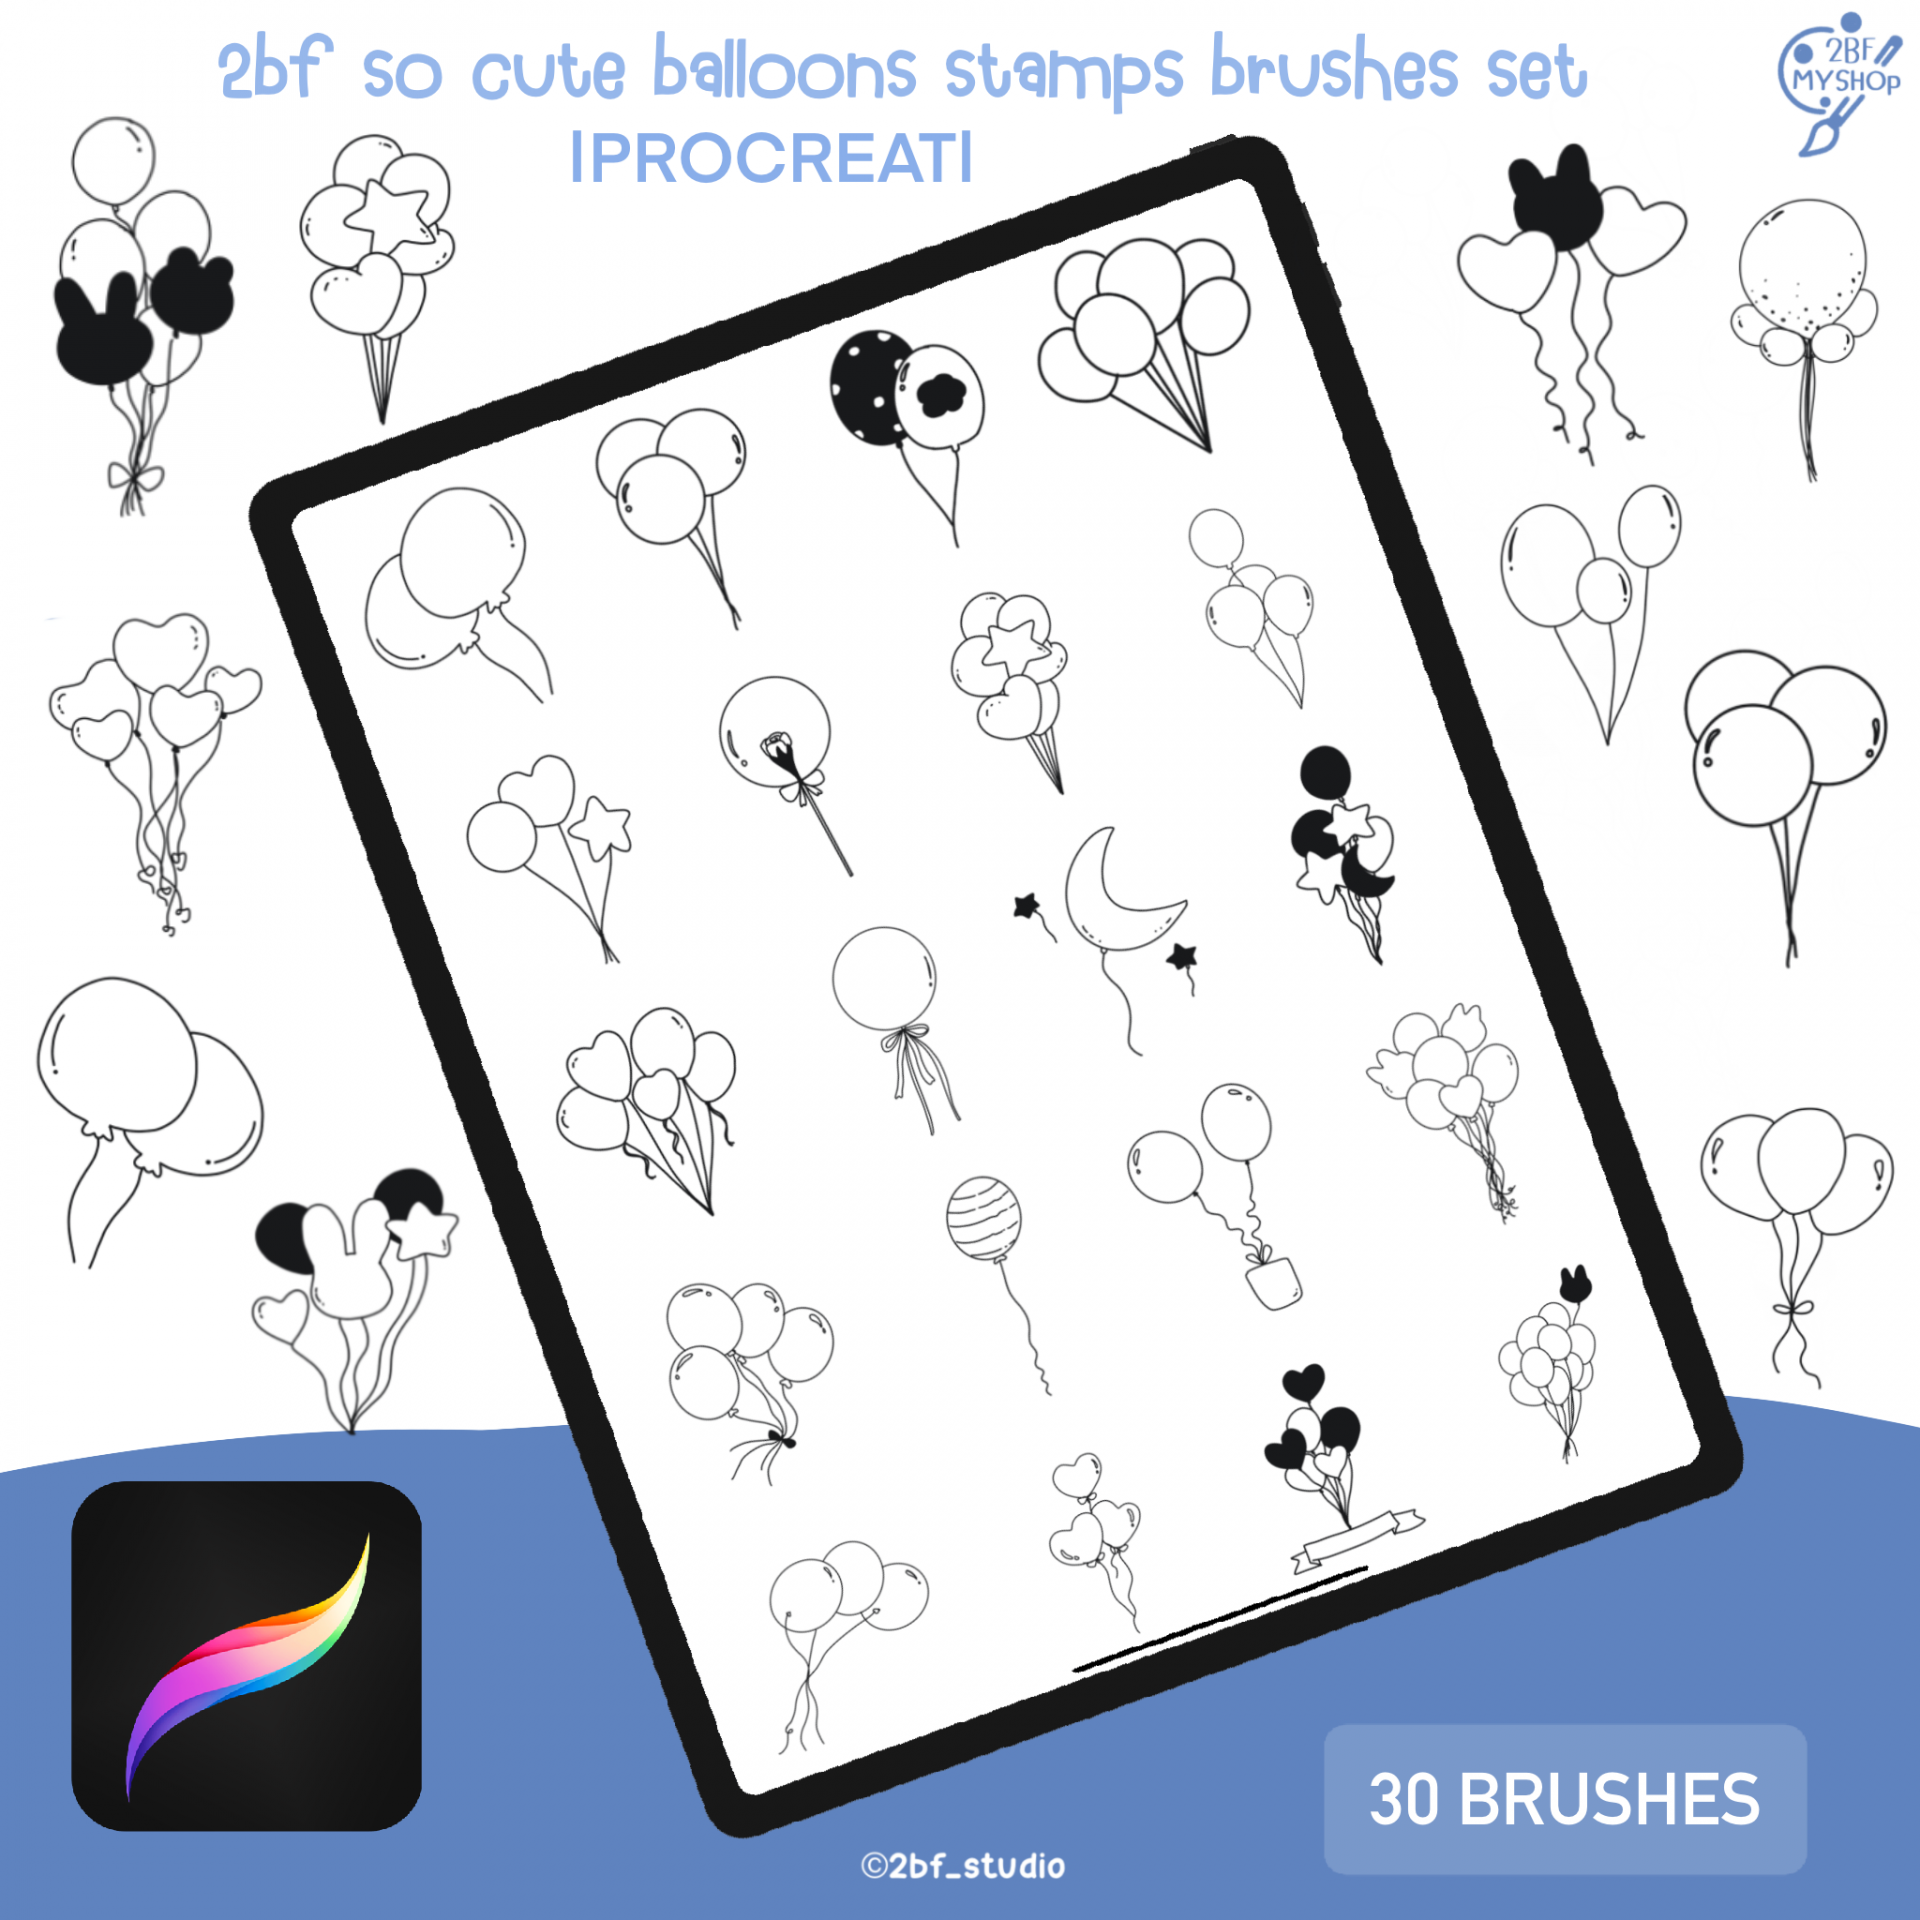 2bf so cute balloons stamps brushes set   |PROCREAT BRUSHED|